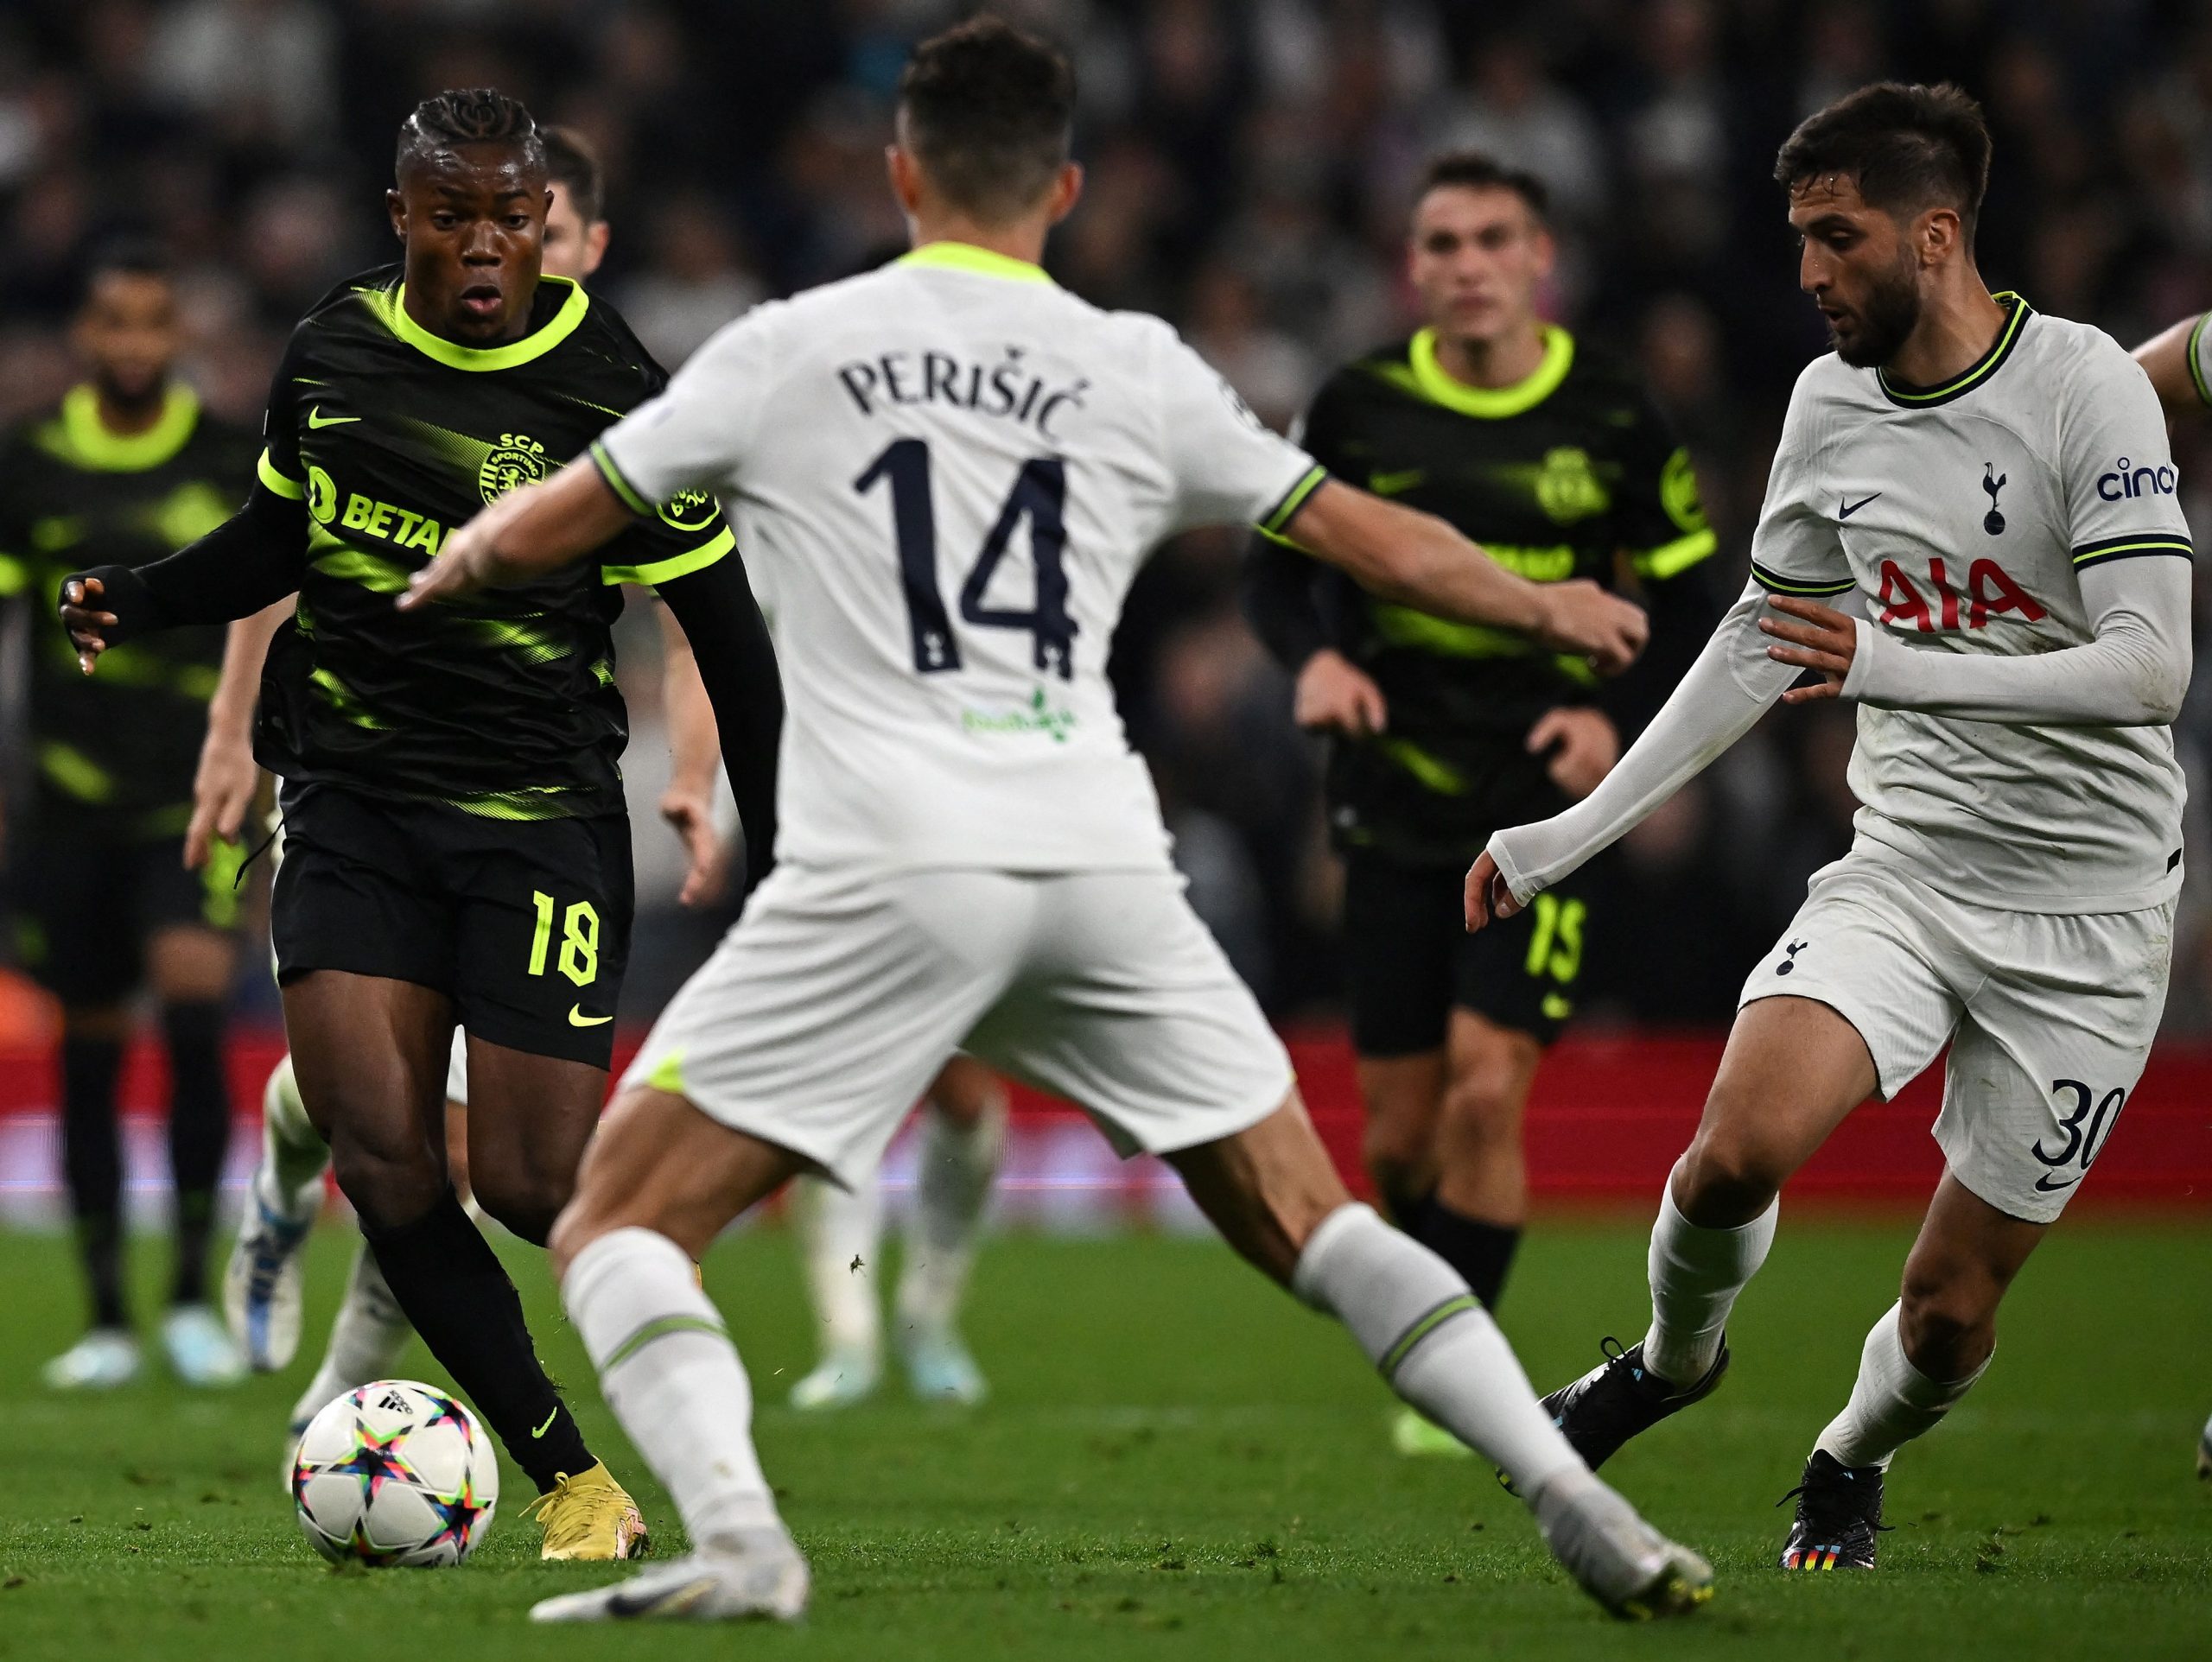 Sporting Lisbon's Abdul Fatawu Issahaku vies with Tottenham Hotspur's Ivan Perisic in a UEFA Champions League group stage match during the 2022-23 season.